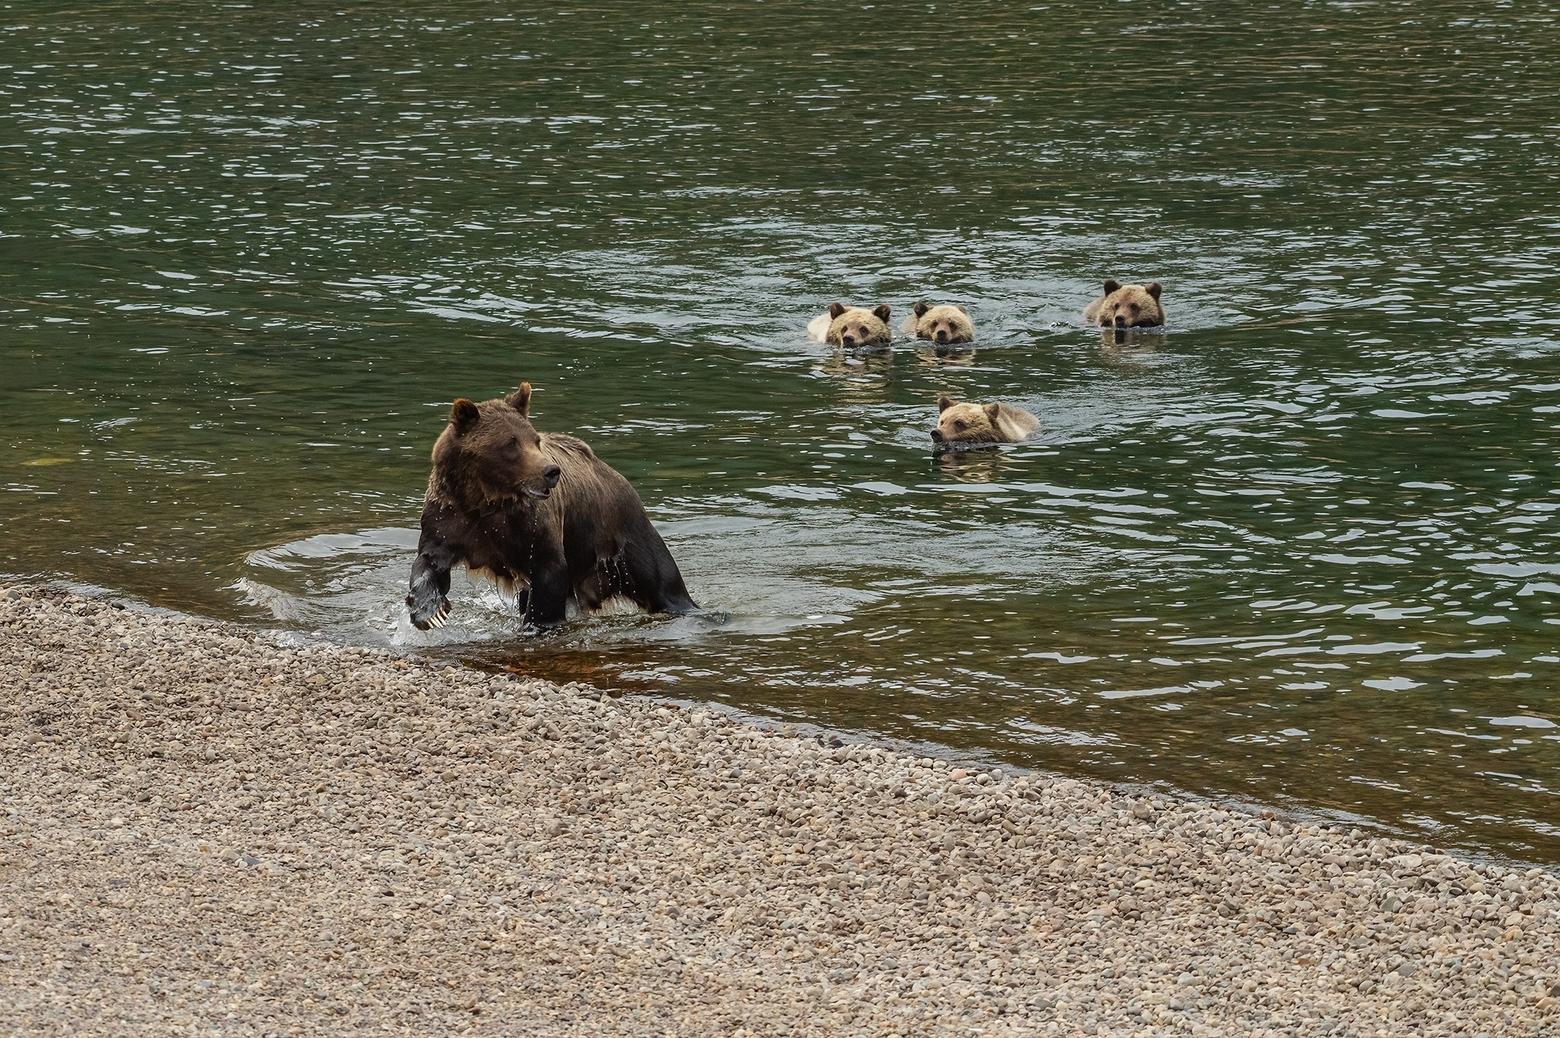 399 and her four cubs complete a swim across the Snake River in 2021. Known for her attentiveness to their safety, 399 has stood at the side of a busy highway with cubs beside her, and looked both ways for oncoming traffic before guiding them across the asphalt. Photo courtesy Thomas D. Mangelsen (mangelsen.com)